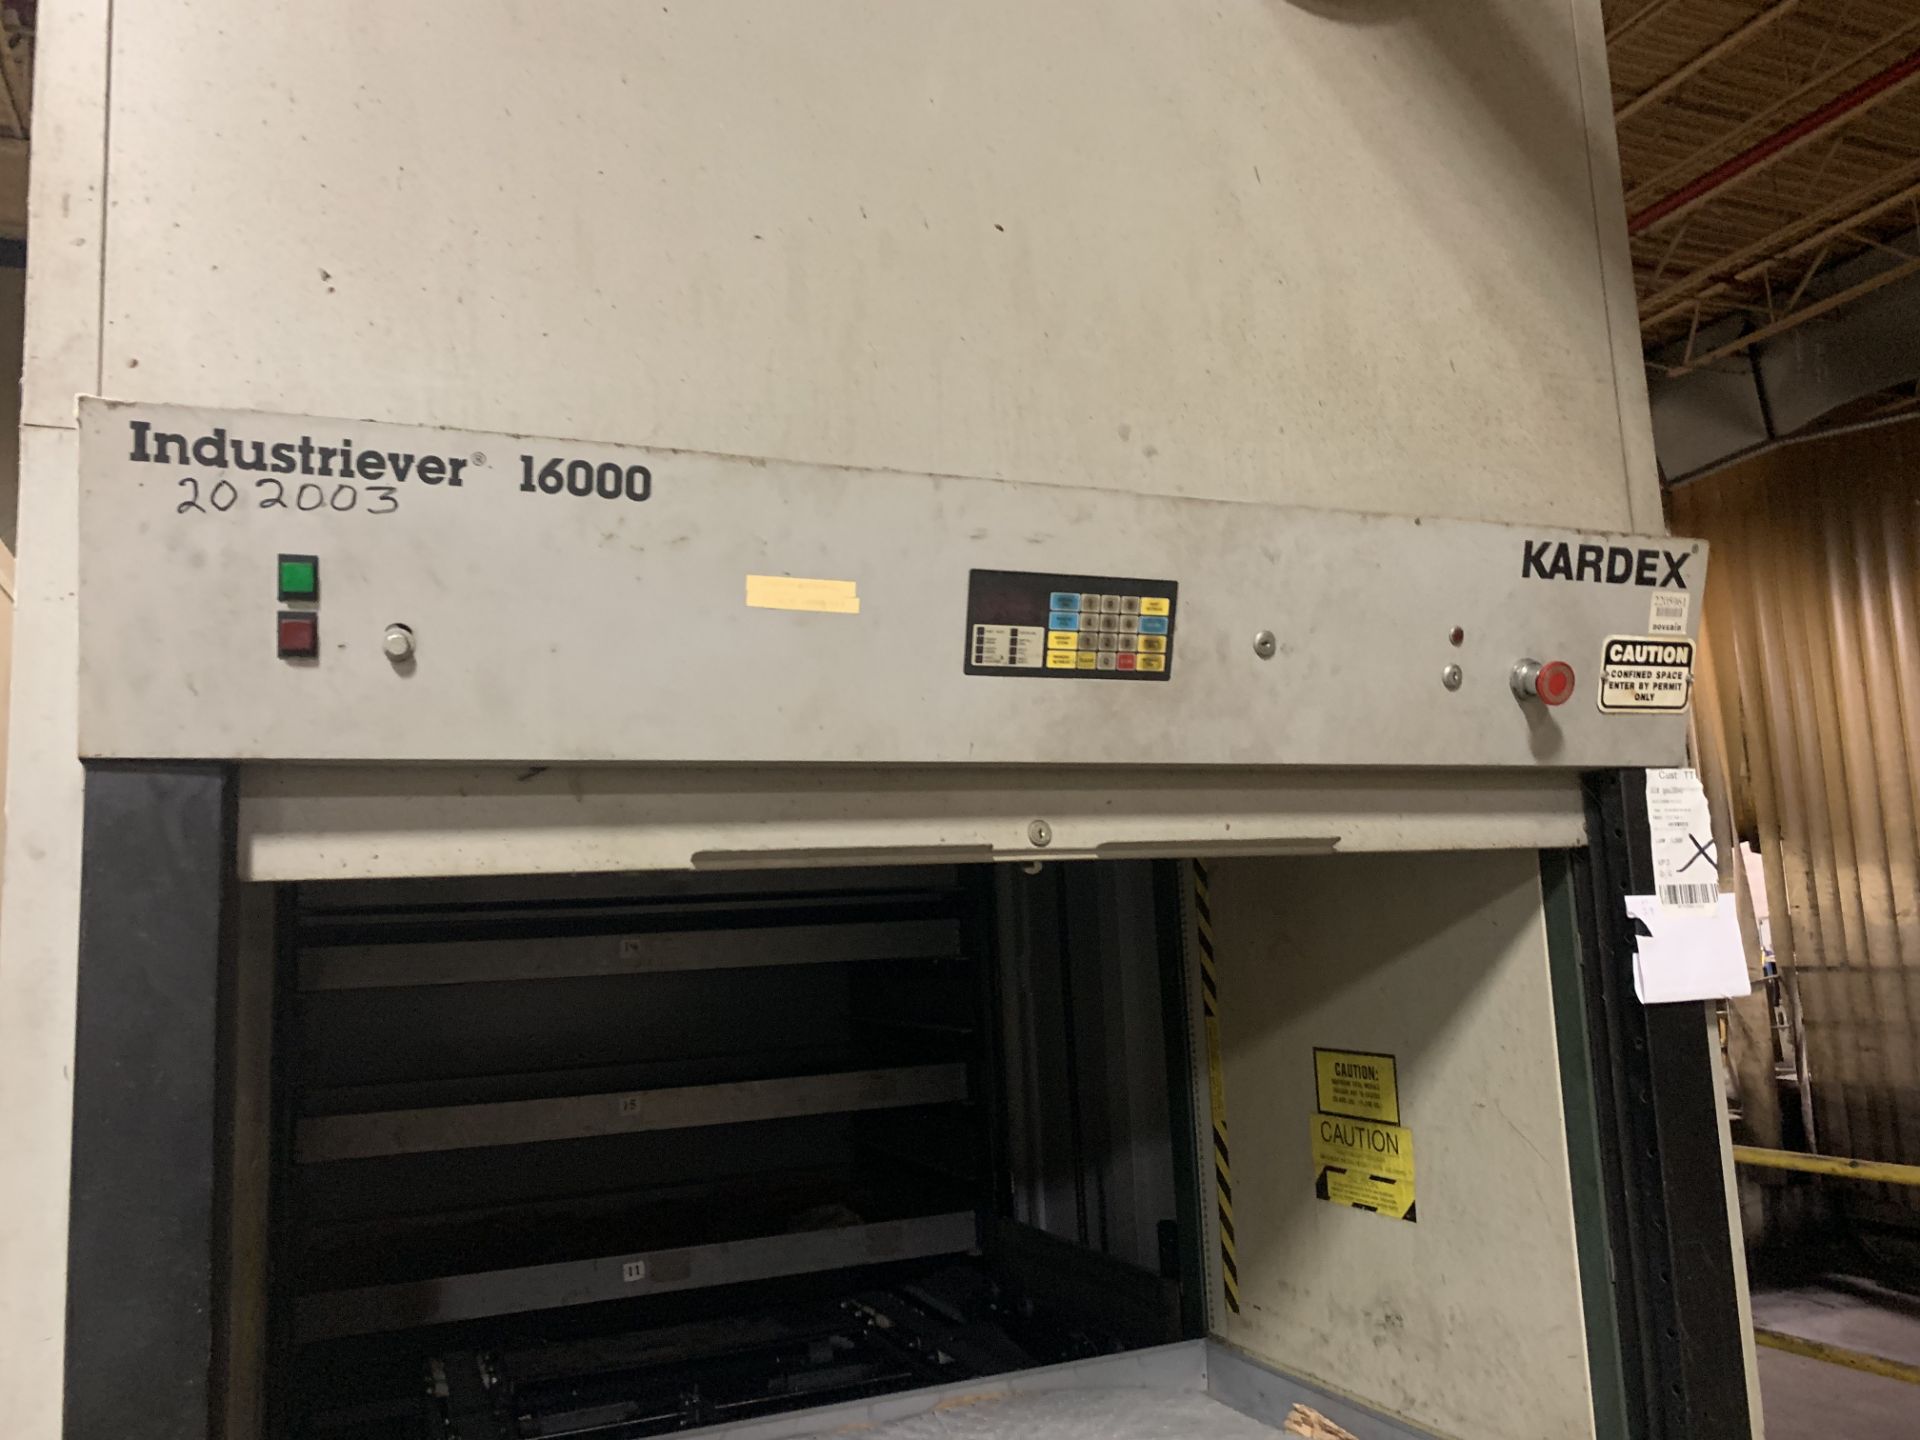 Kardex Industriever 16000 Vertical Lift Cabinet - Image 2 of 4